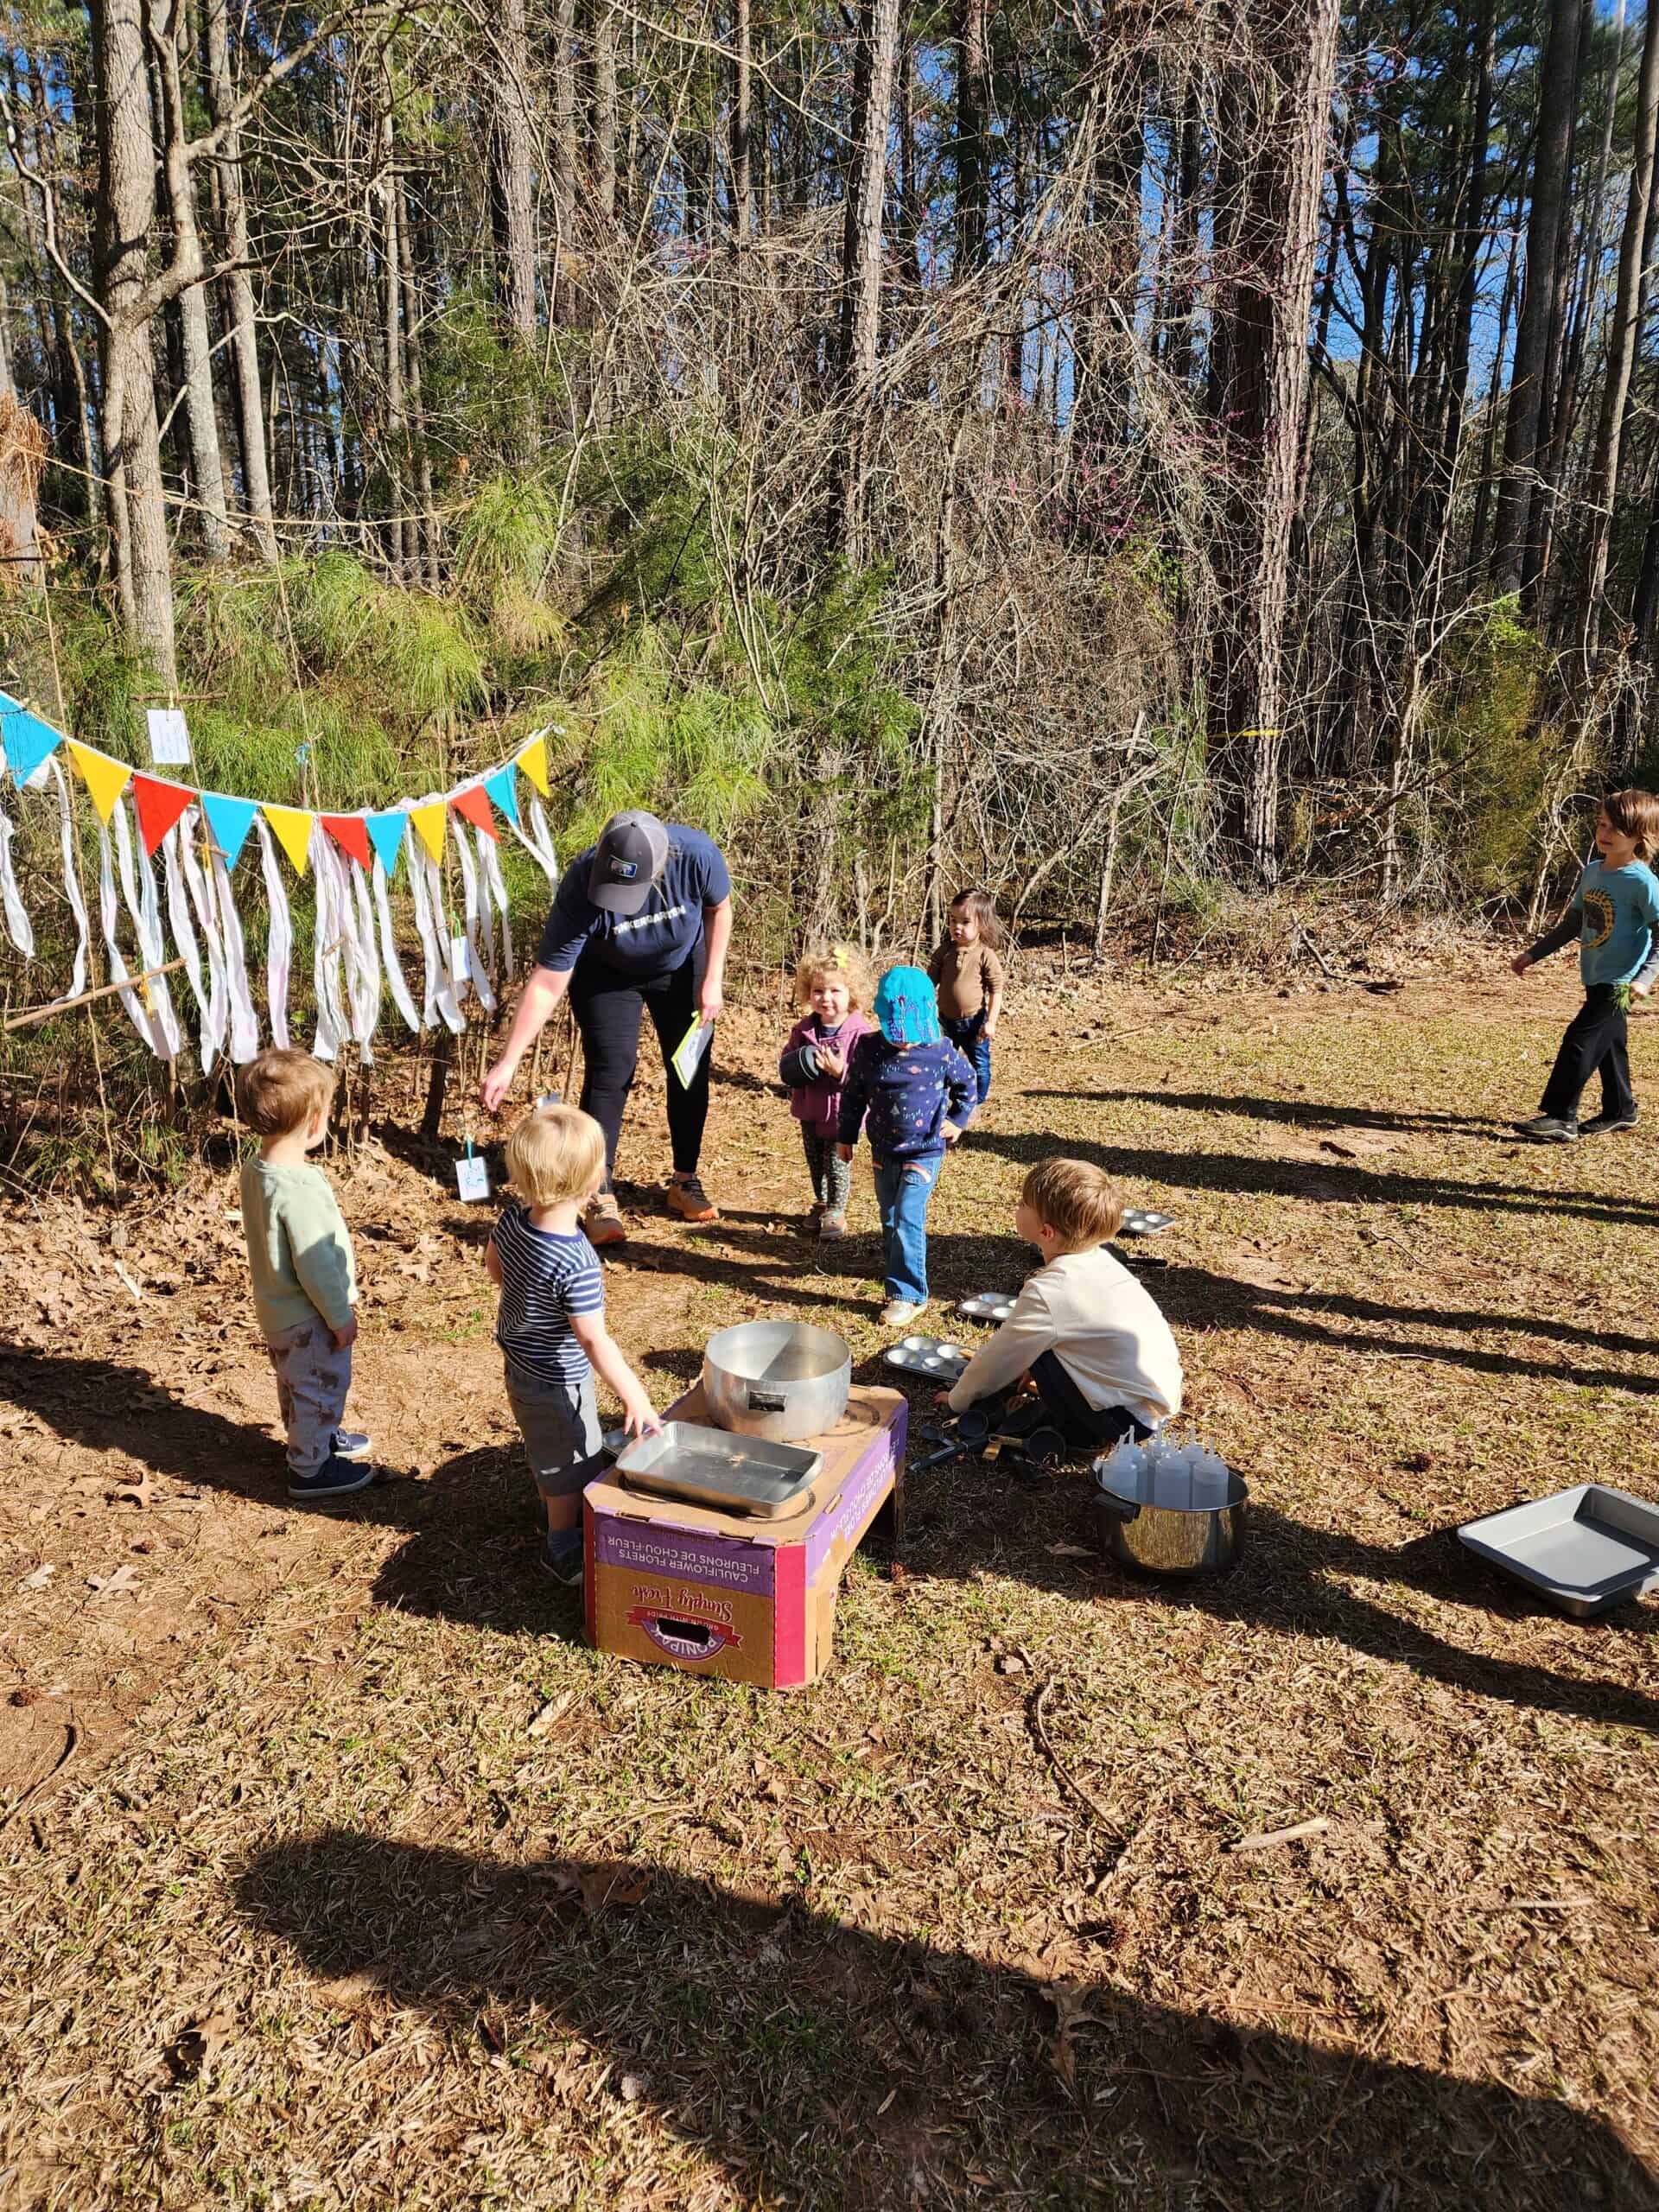 Young kids gather around an outdoor setup with pots and pans, shows a nature class for toddlers called Tinkergarten 